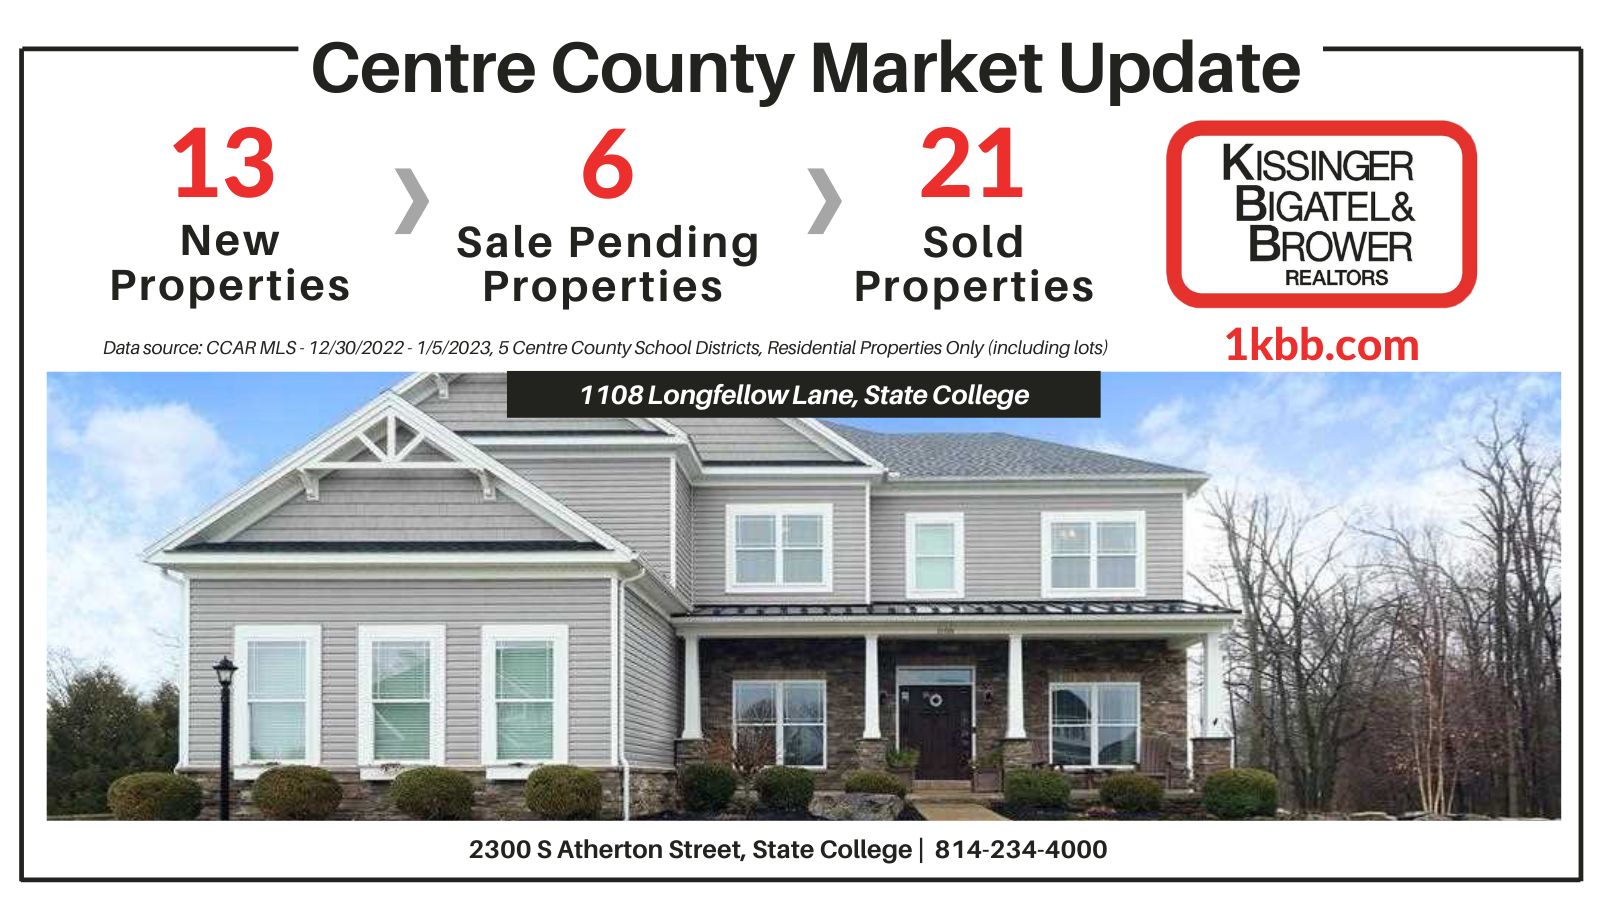 Market Update Report for 12/31-1/5/2023 in Centre County, PA